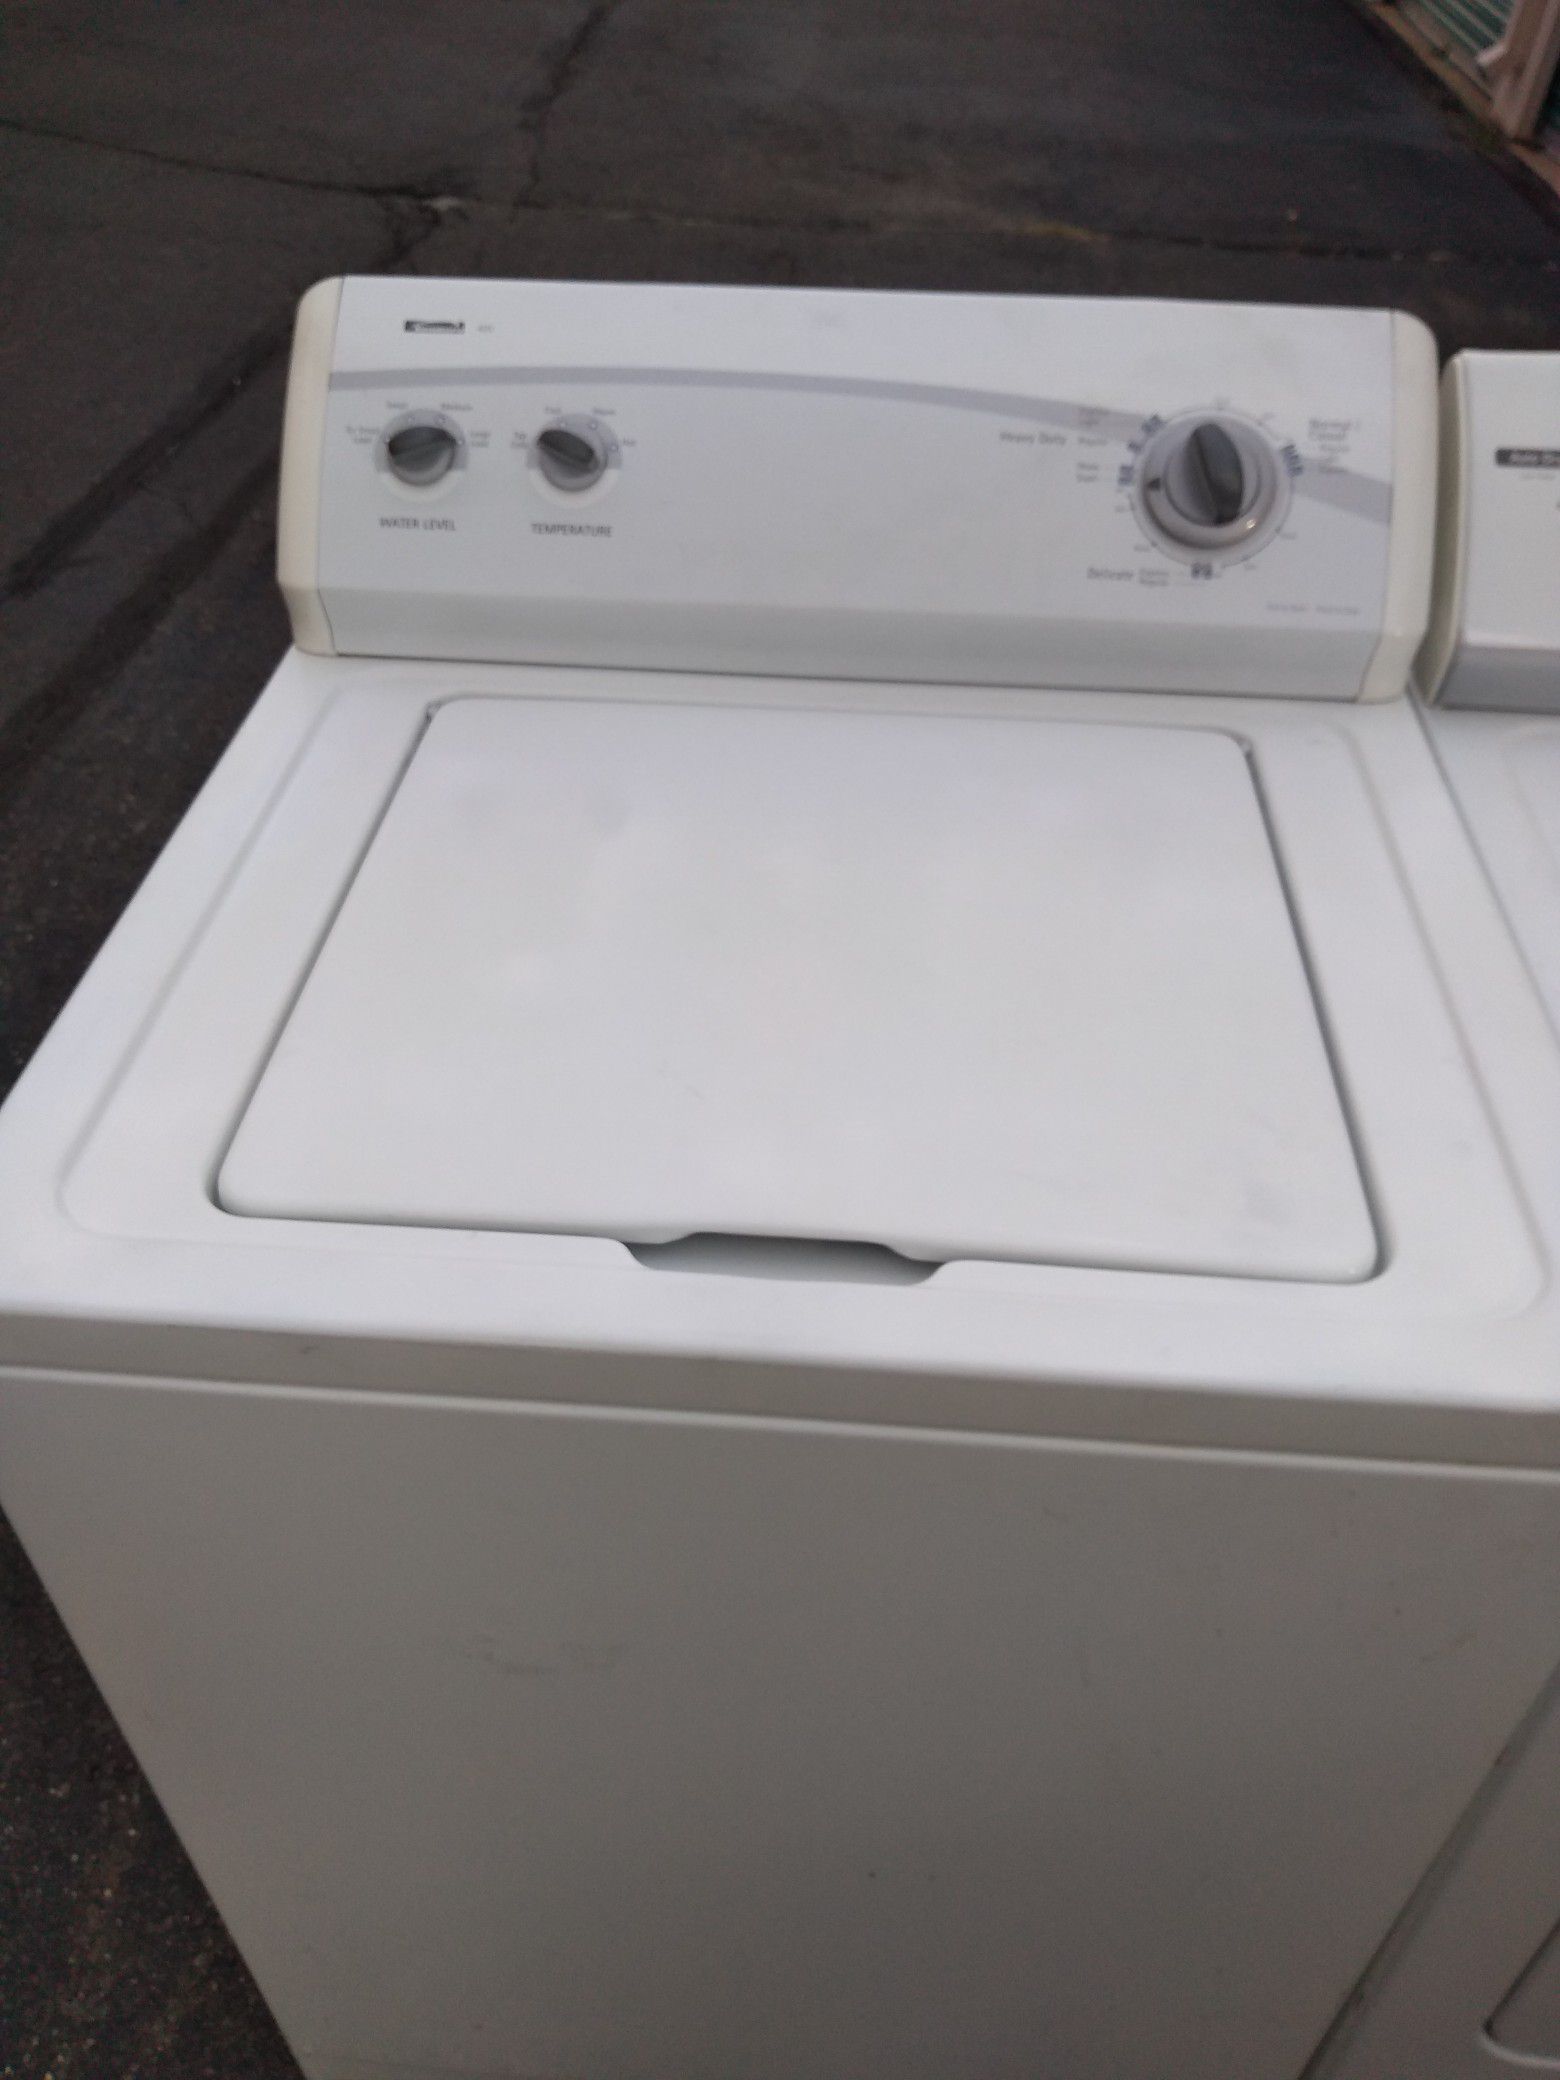 Large-capacity Kenmore washer excellent new condition reliable and ready to use curbside delivery or pickup is